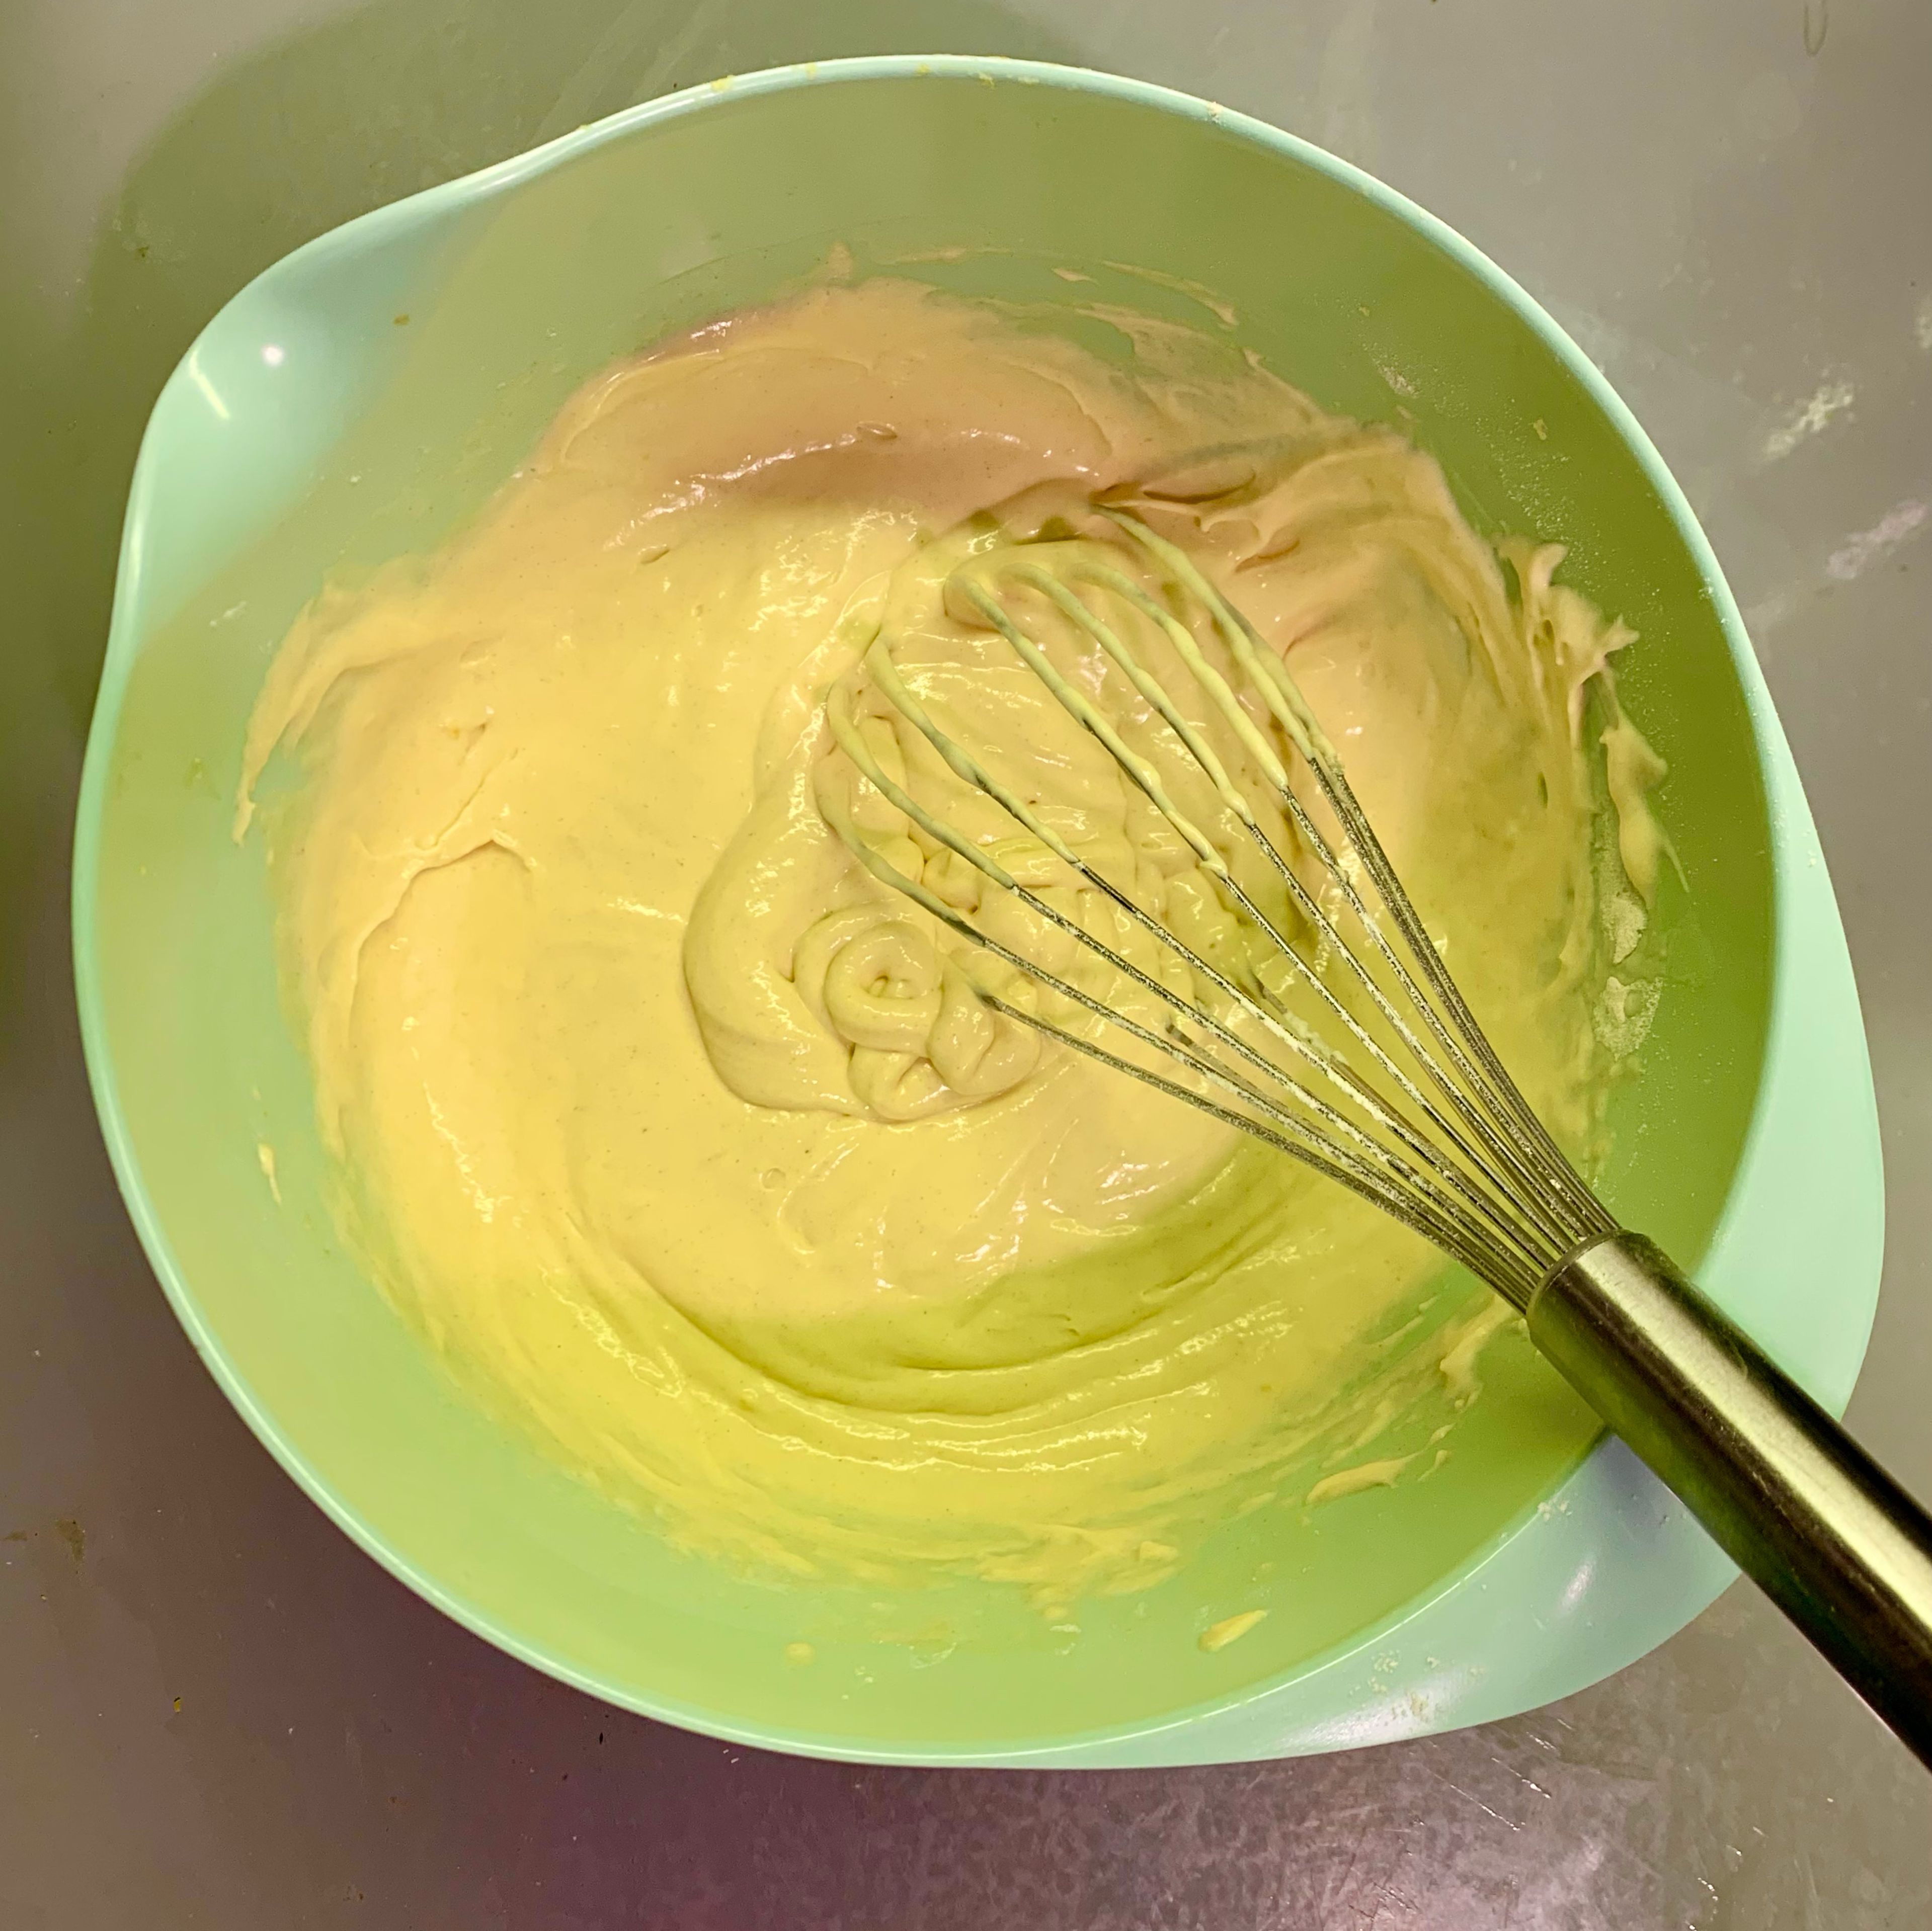 In a bowl mix the eggs ( room temperature)und sugar well then add cream and the vanilla extract and keep mixing until the sugar resolves, then add the flour and baking soda and baking powder and mix until all ingredients well combined.